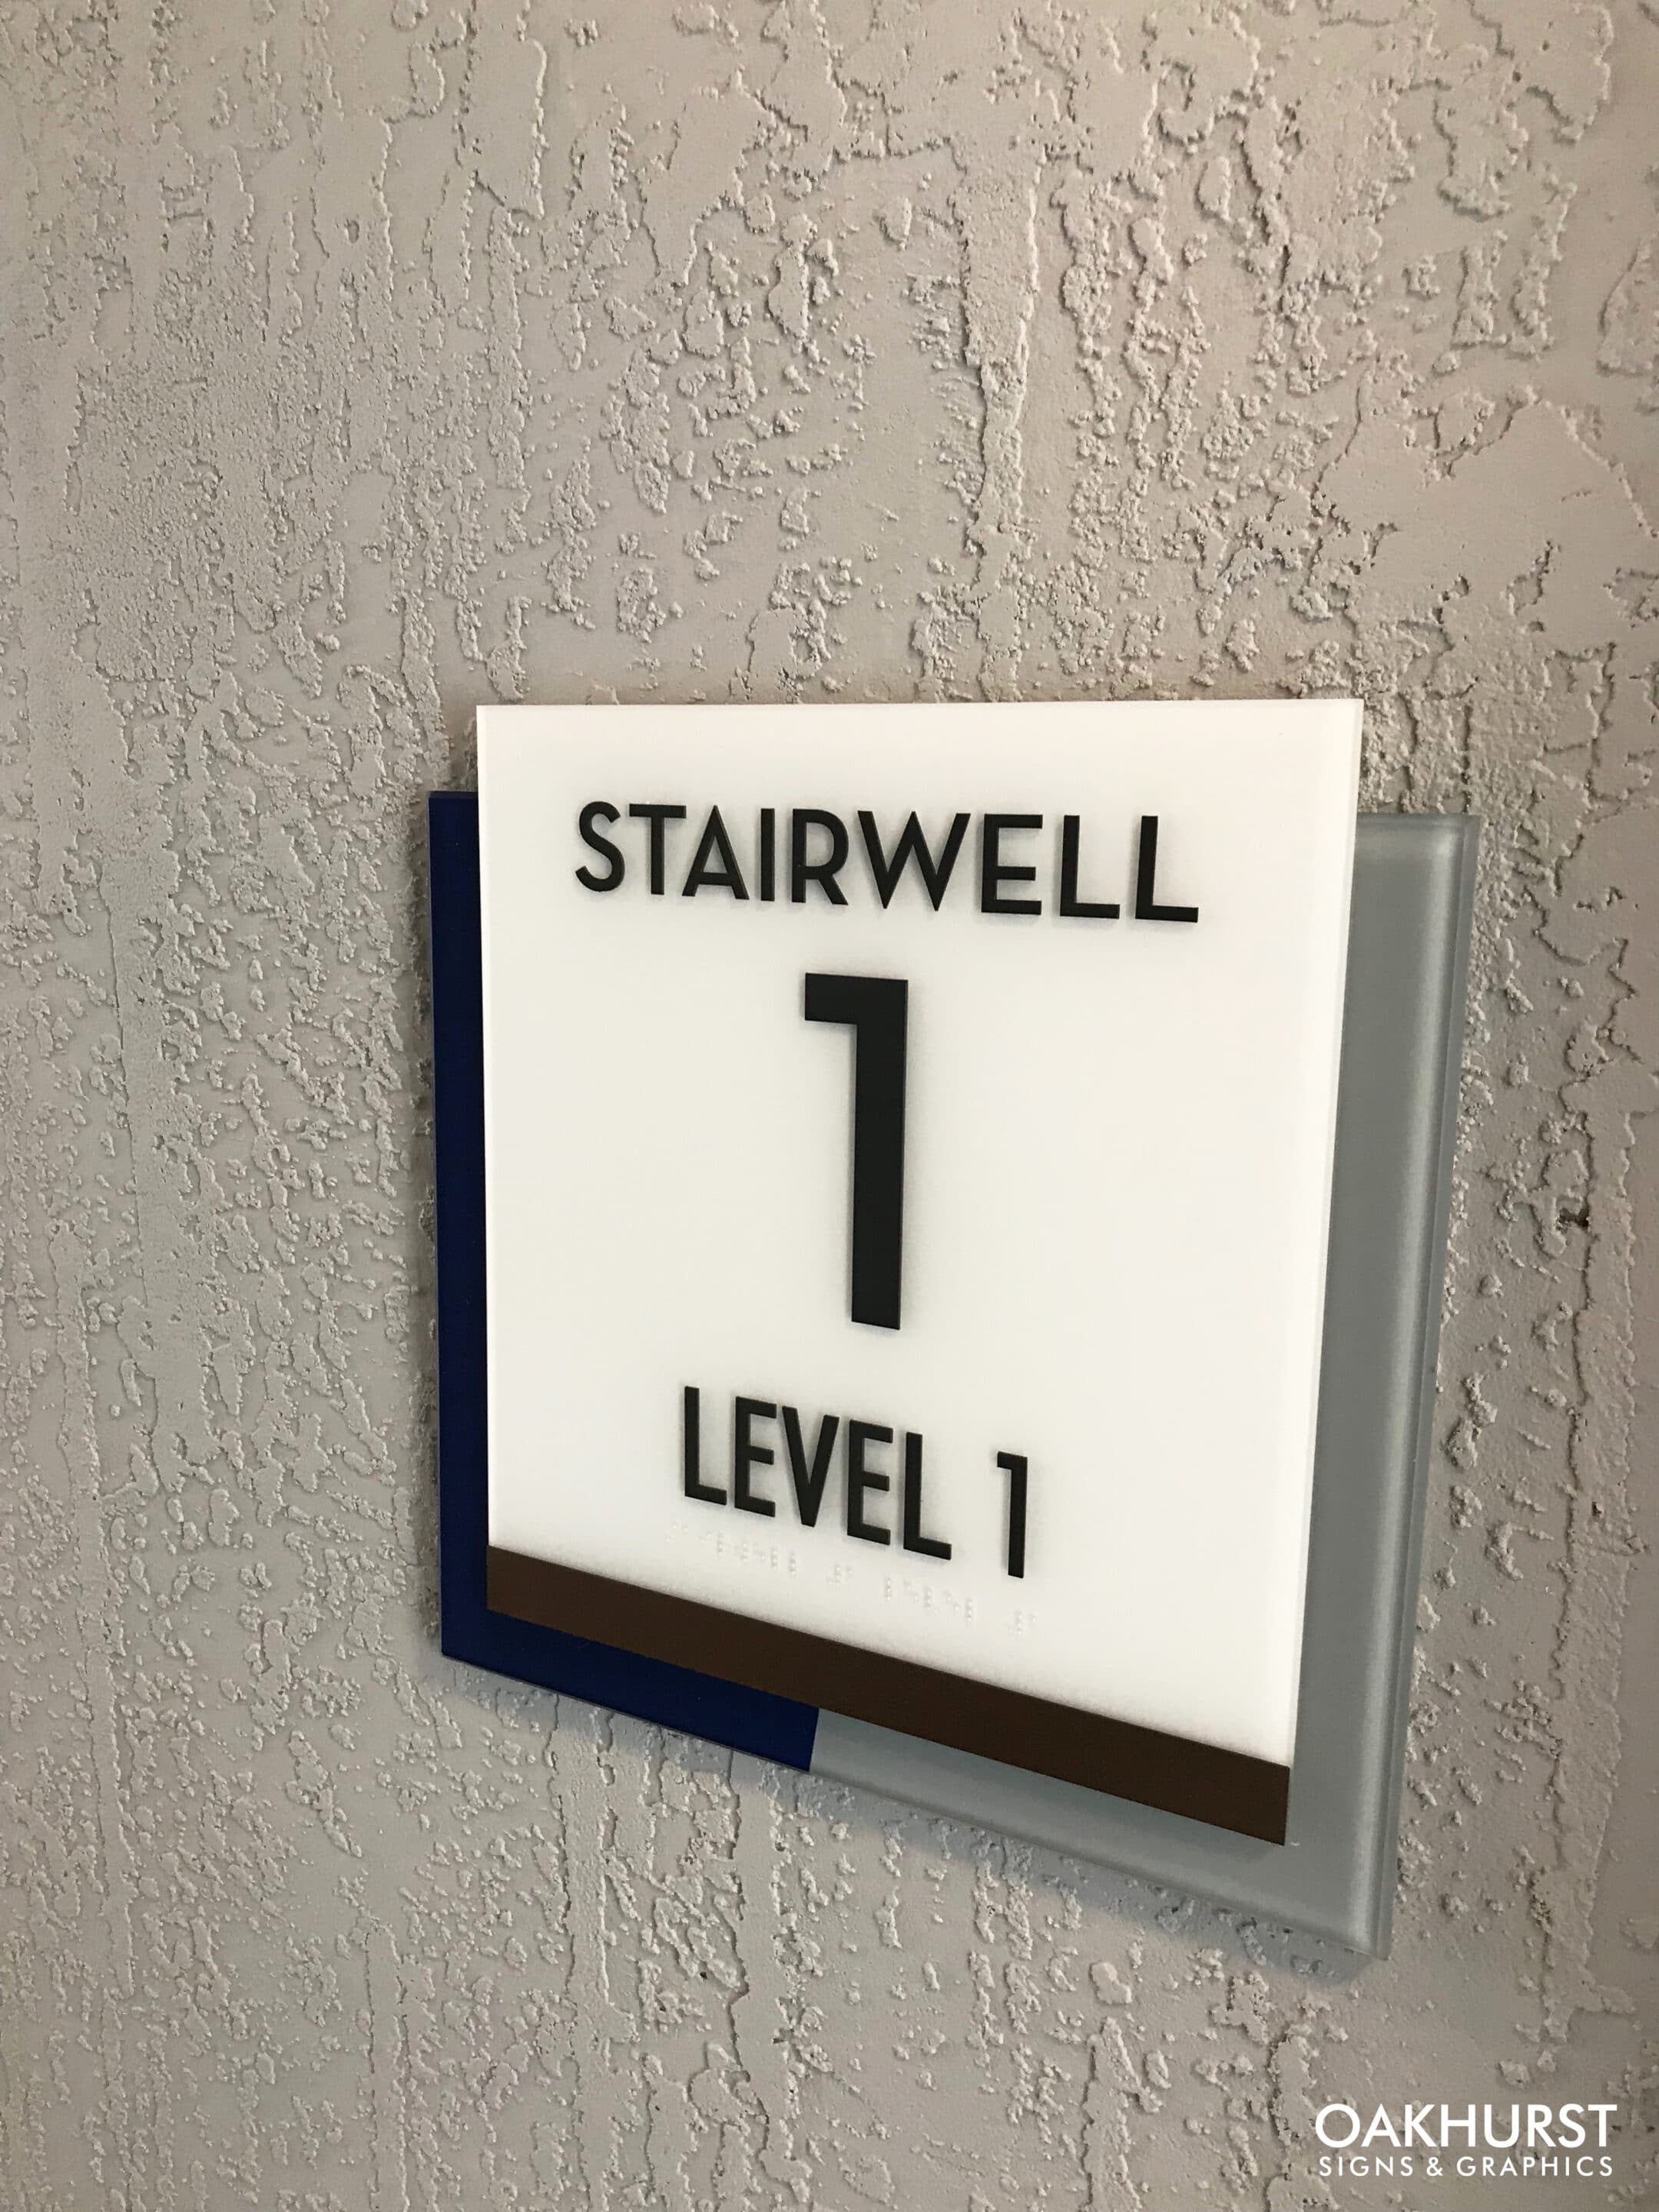 ADA signage labeling stairwell level